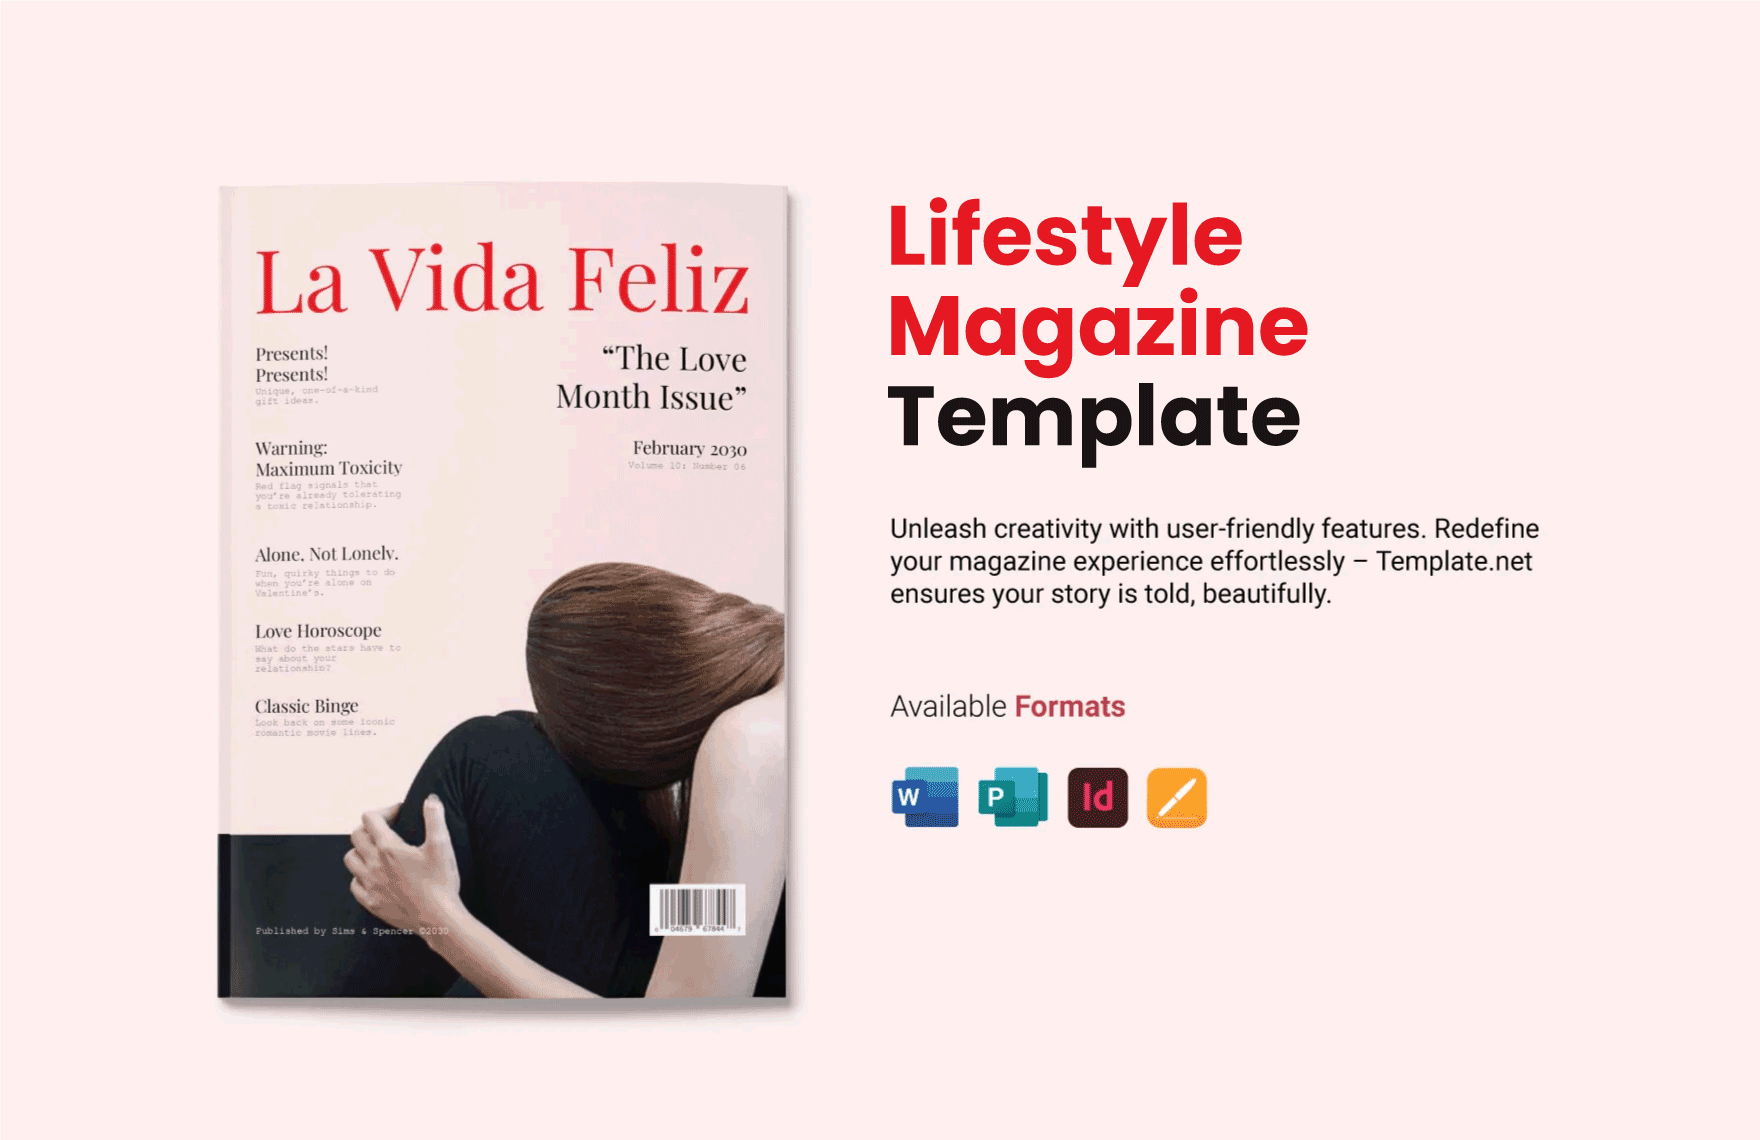 Free Lifestyle Magazine Template in Word, Apple Pages, Publisher, InDesign